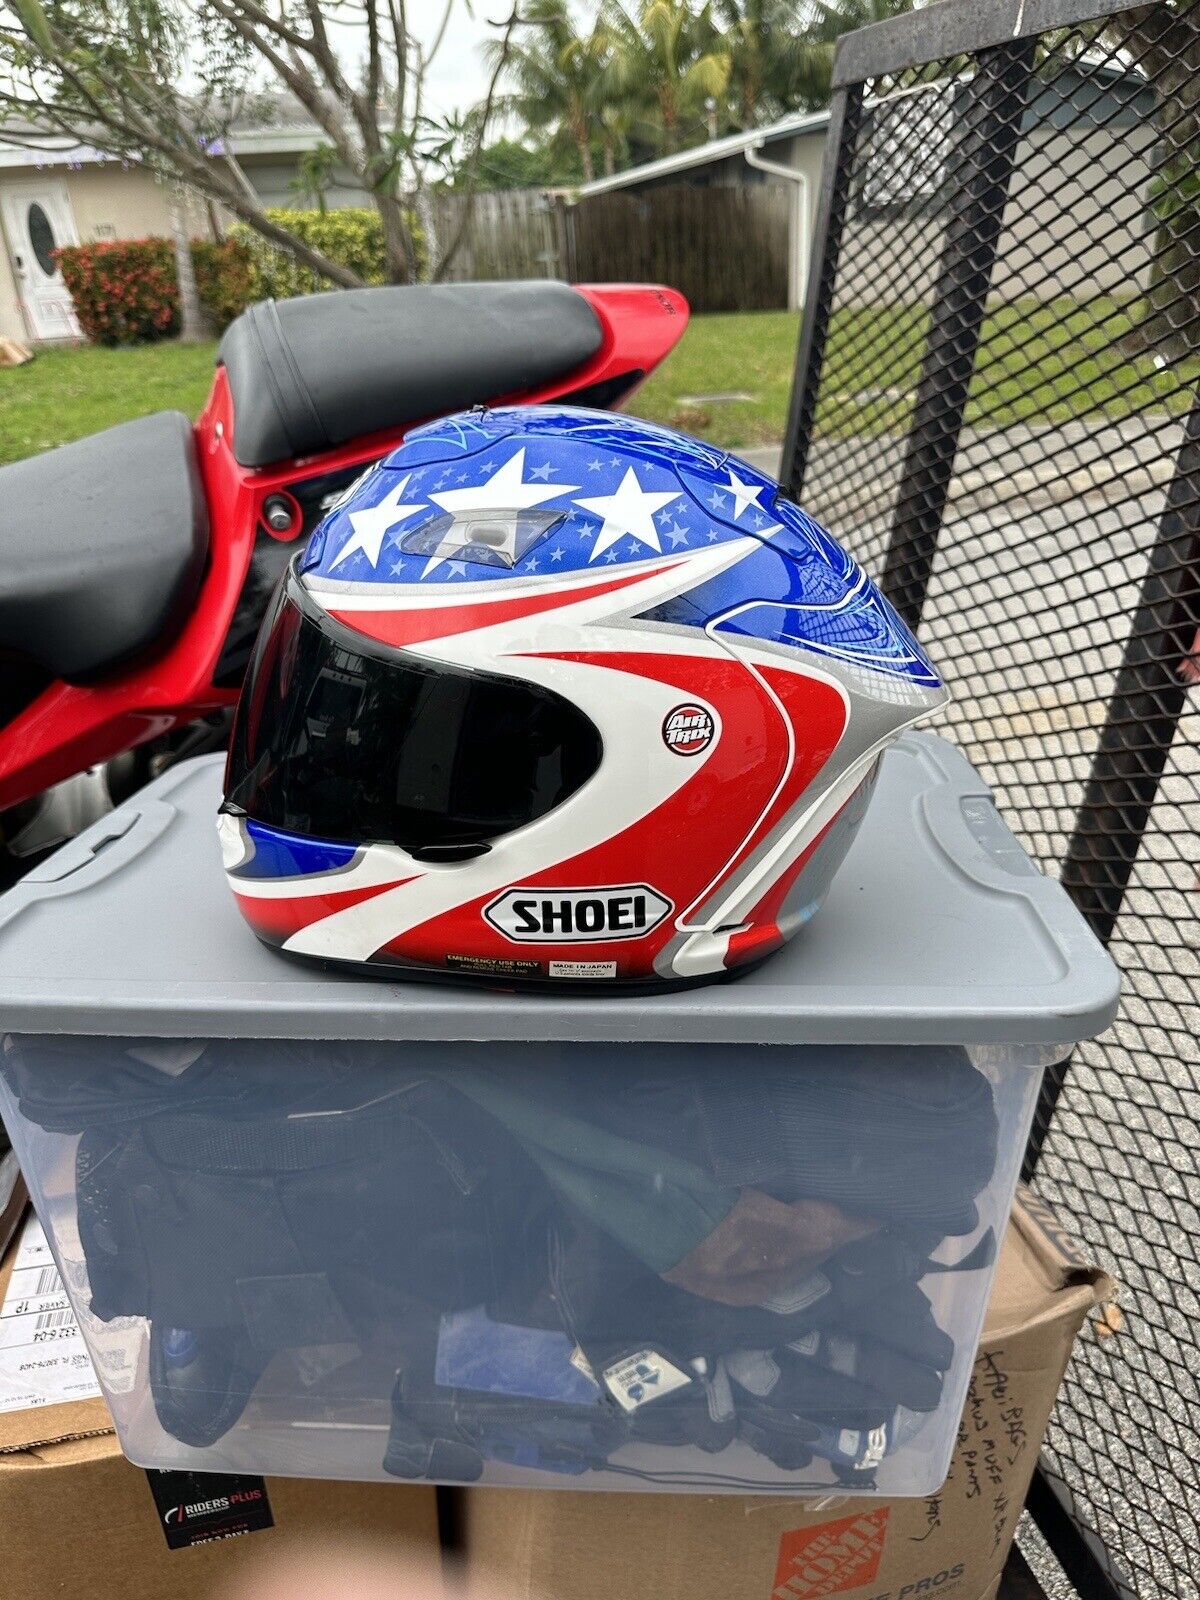 Shoei Full Face Motorcycle Helmet Red White Blue Silver with Stars Large